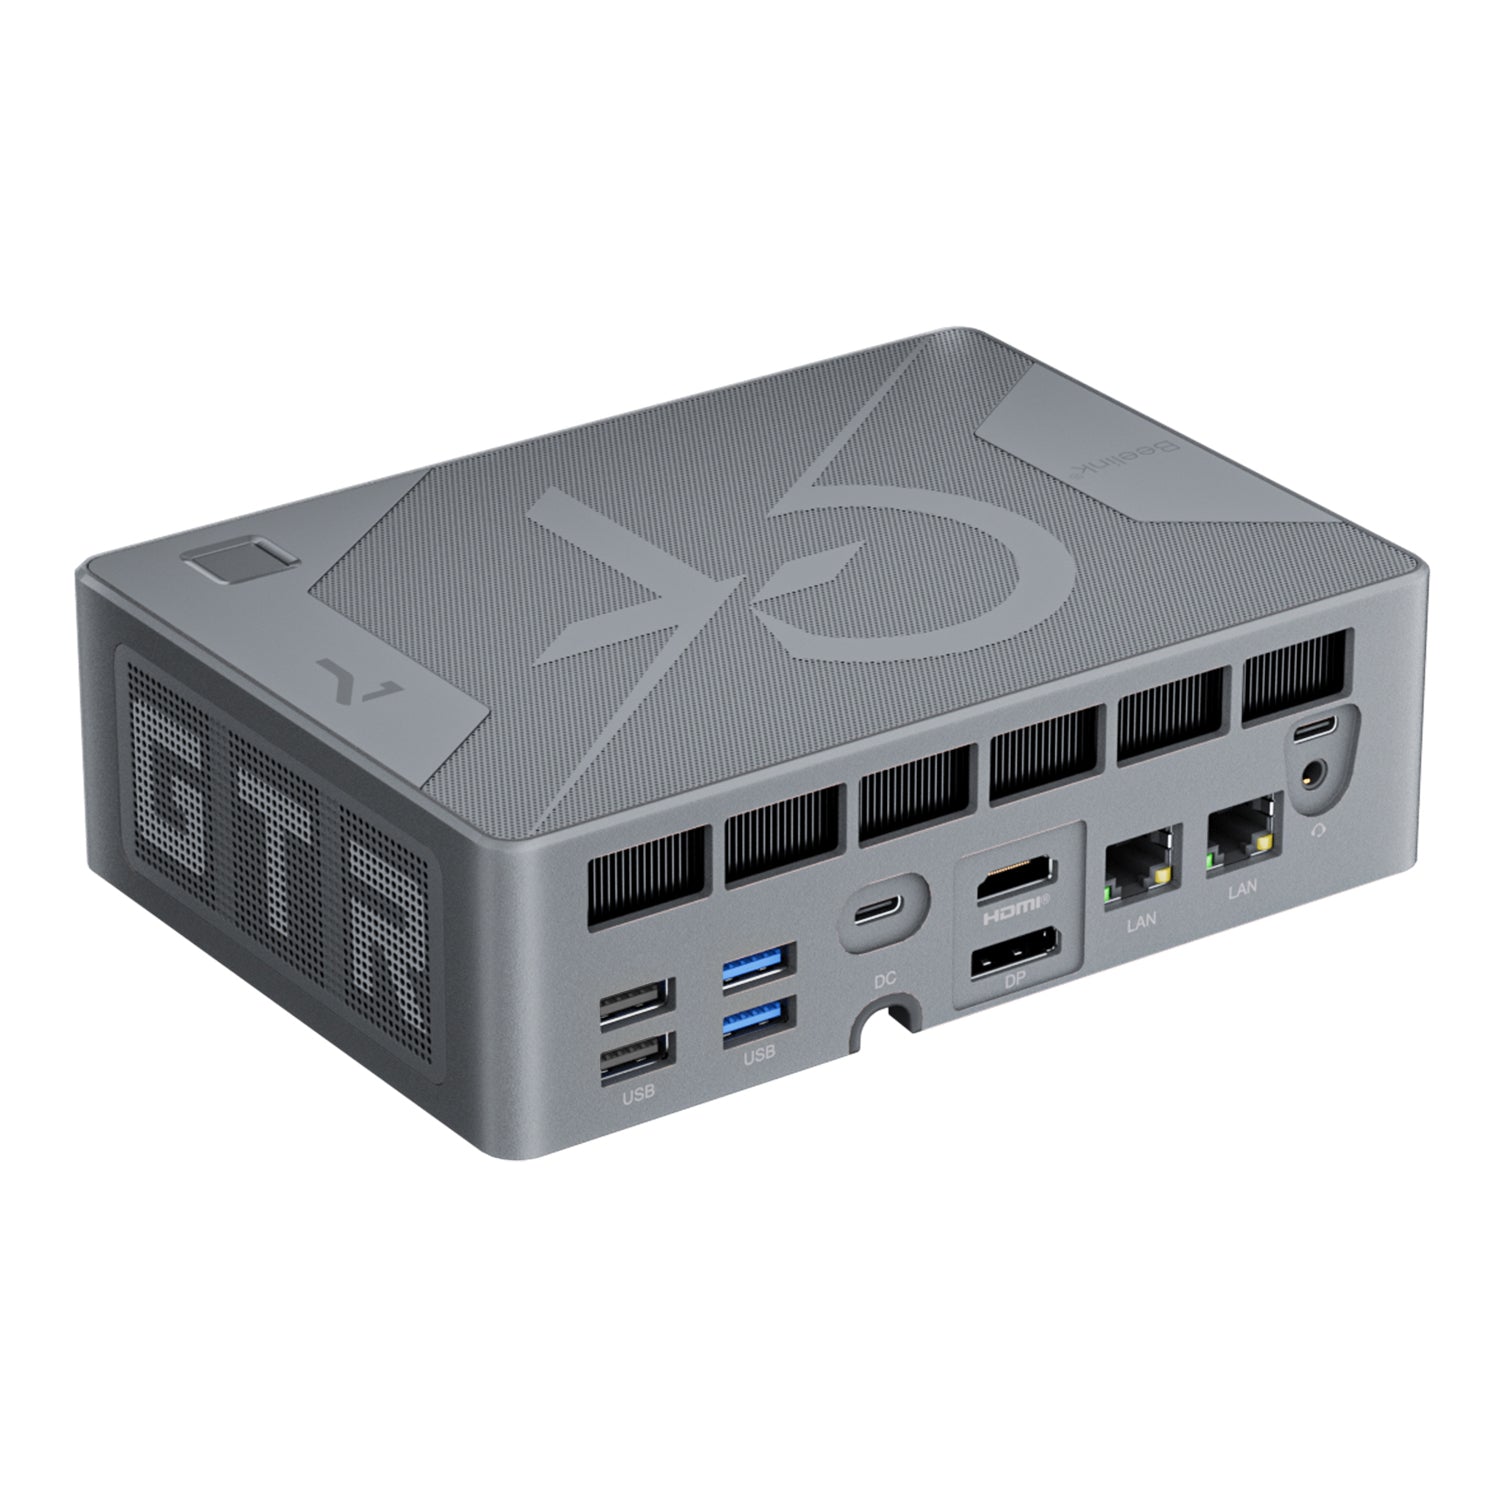 Beelink GTR7 Mini PC review: Power in a small package